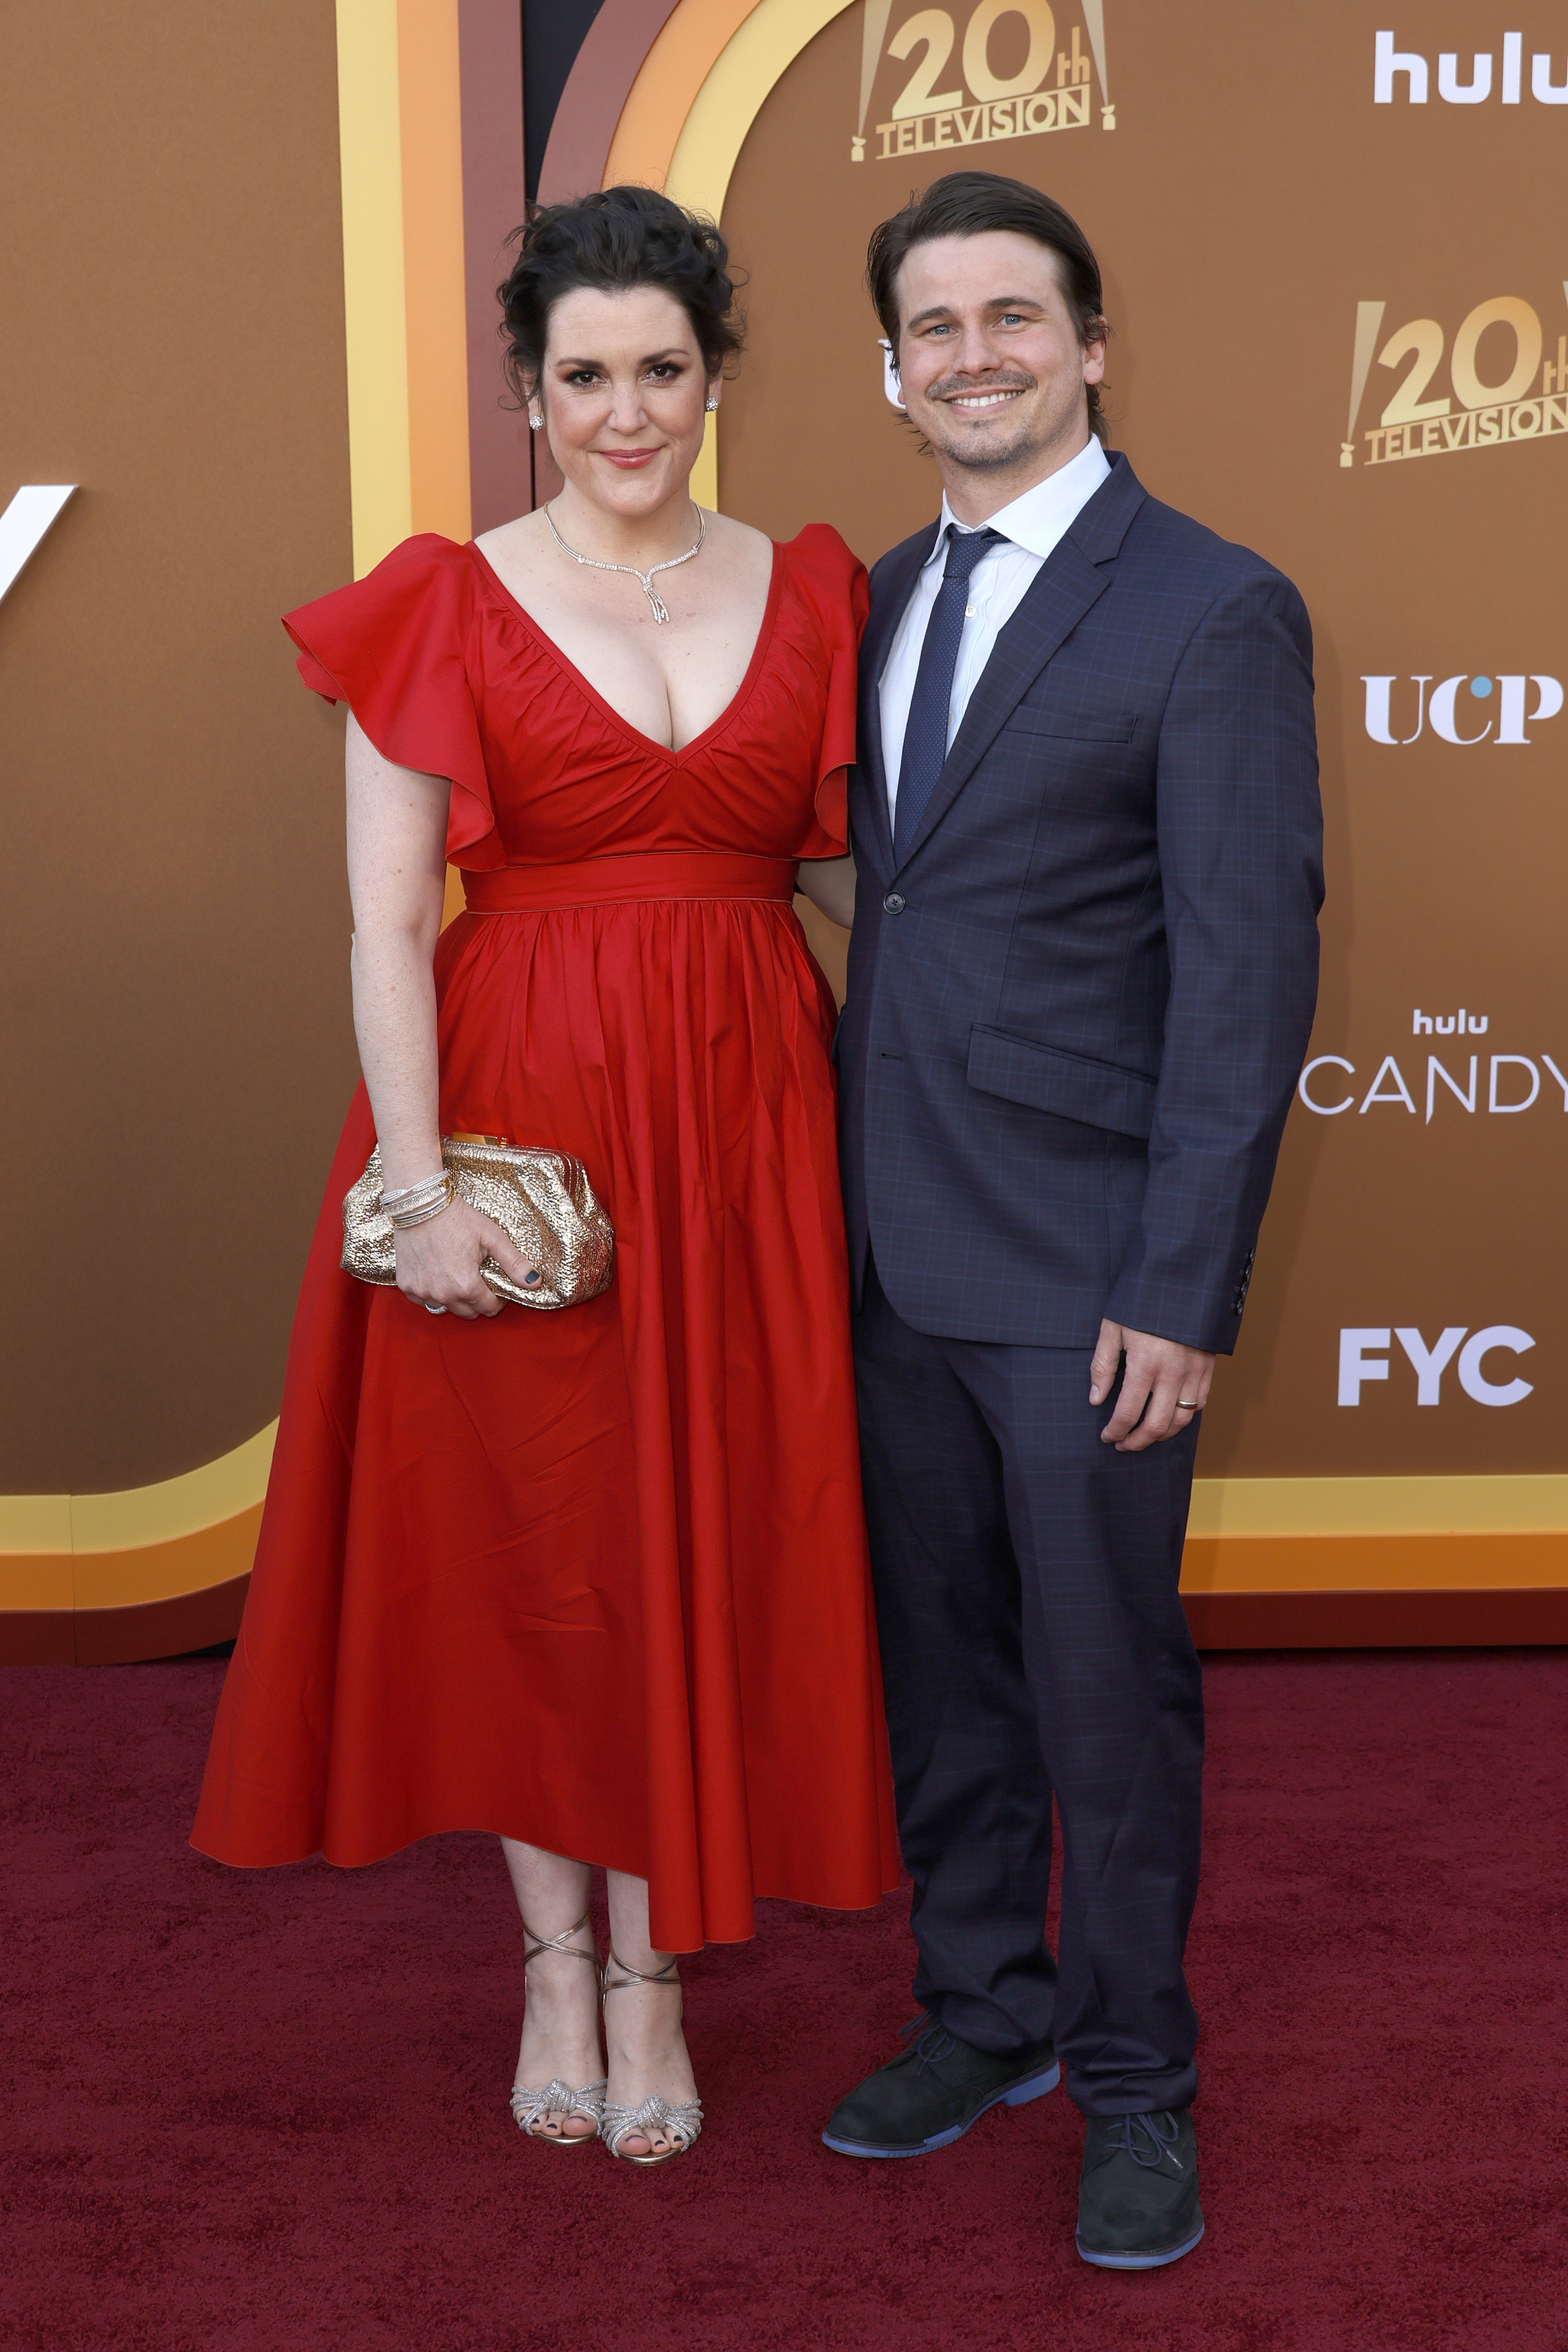 Melanie Lynskey and Jason Ritter at the Los Angeles Premiere FYC Event for "Candy" on May 9, 2022, in Los Angeles, California | Source: Getty Images